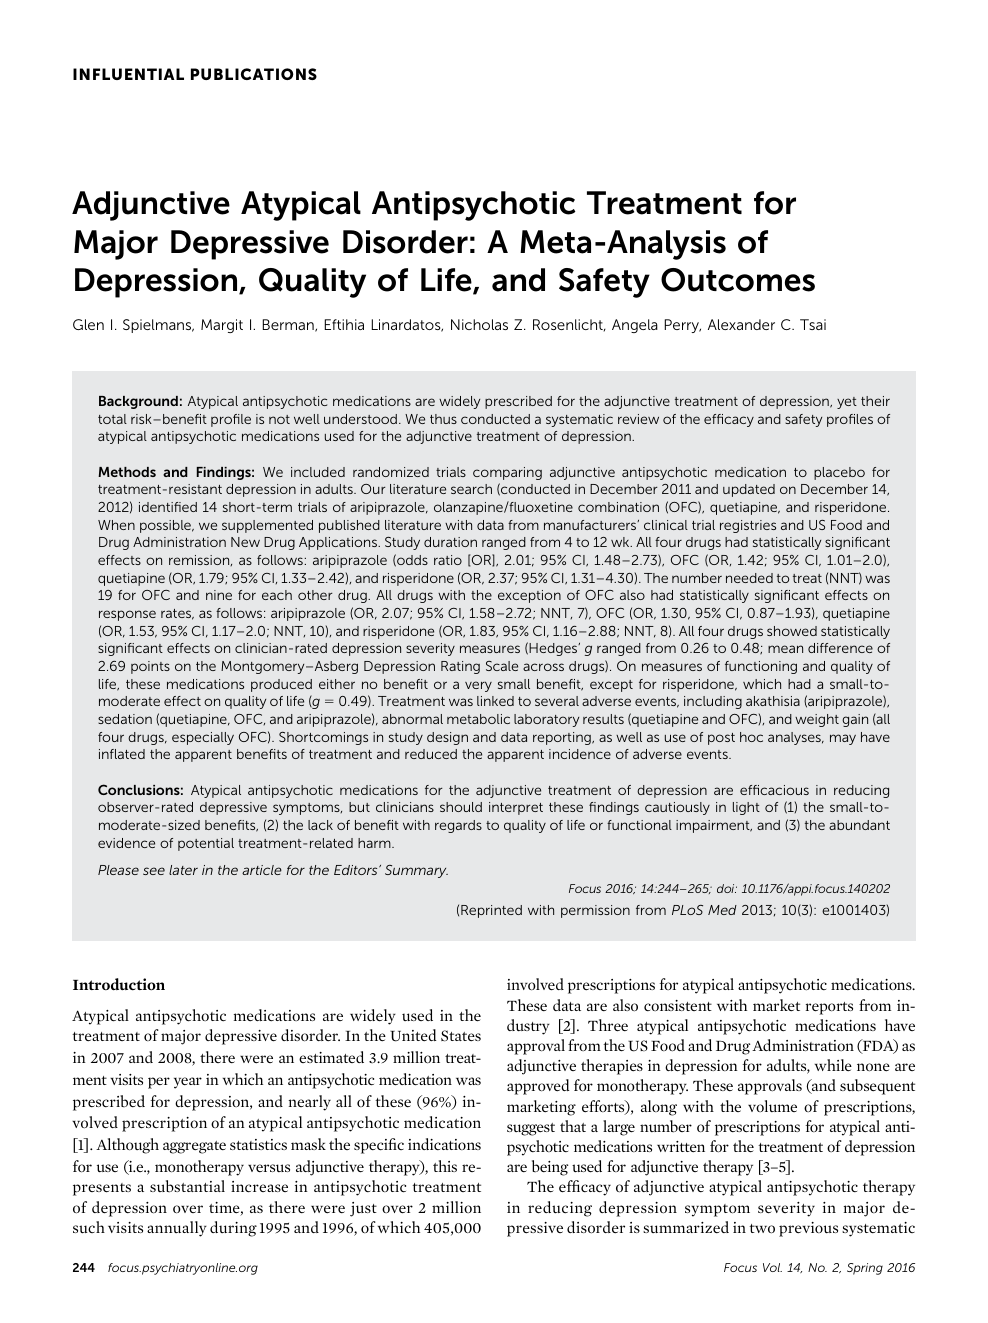 Adjunctive Atypical Antipsychotic Treatment For Major Depressive Disorder A Meta Analysis Of Depression Quality Of Life And Safety Outcomes Topic Of Research Paper In Clinical Medicine Download Scholarly Article Pdf And Read